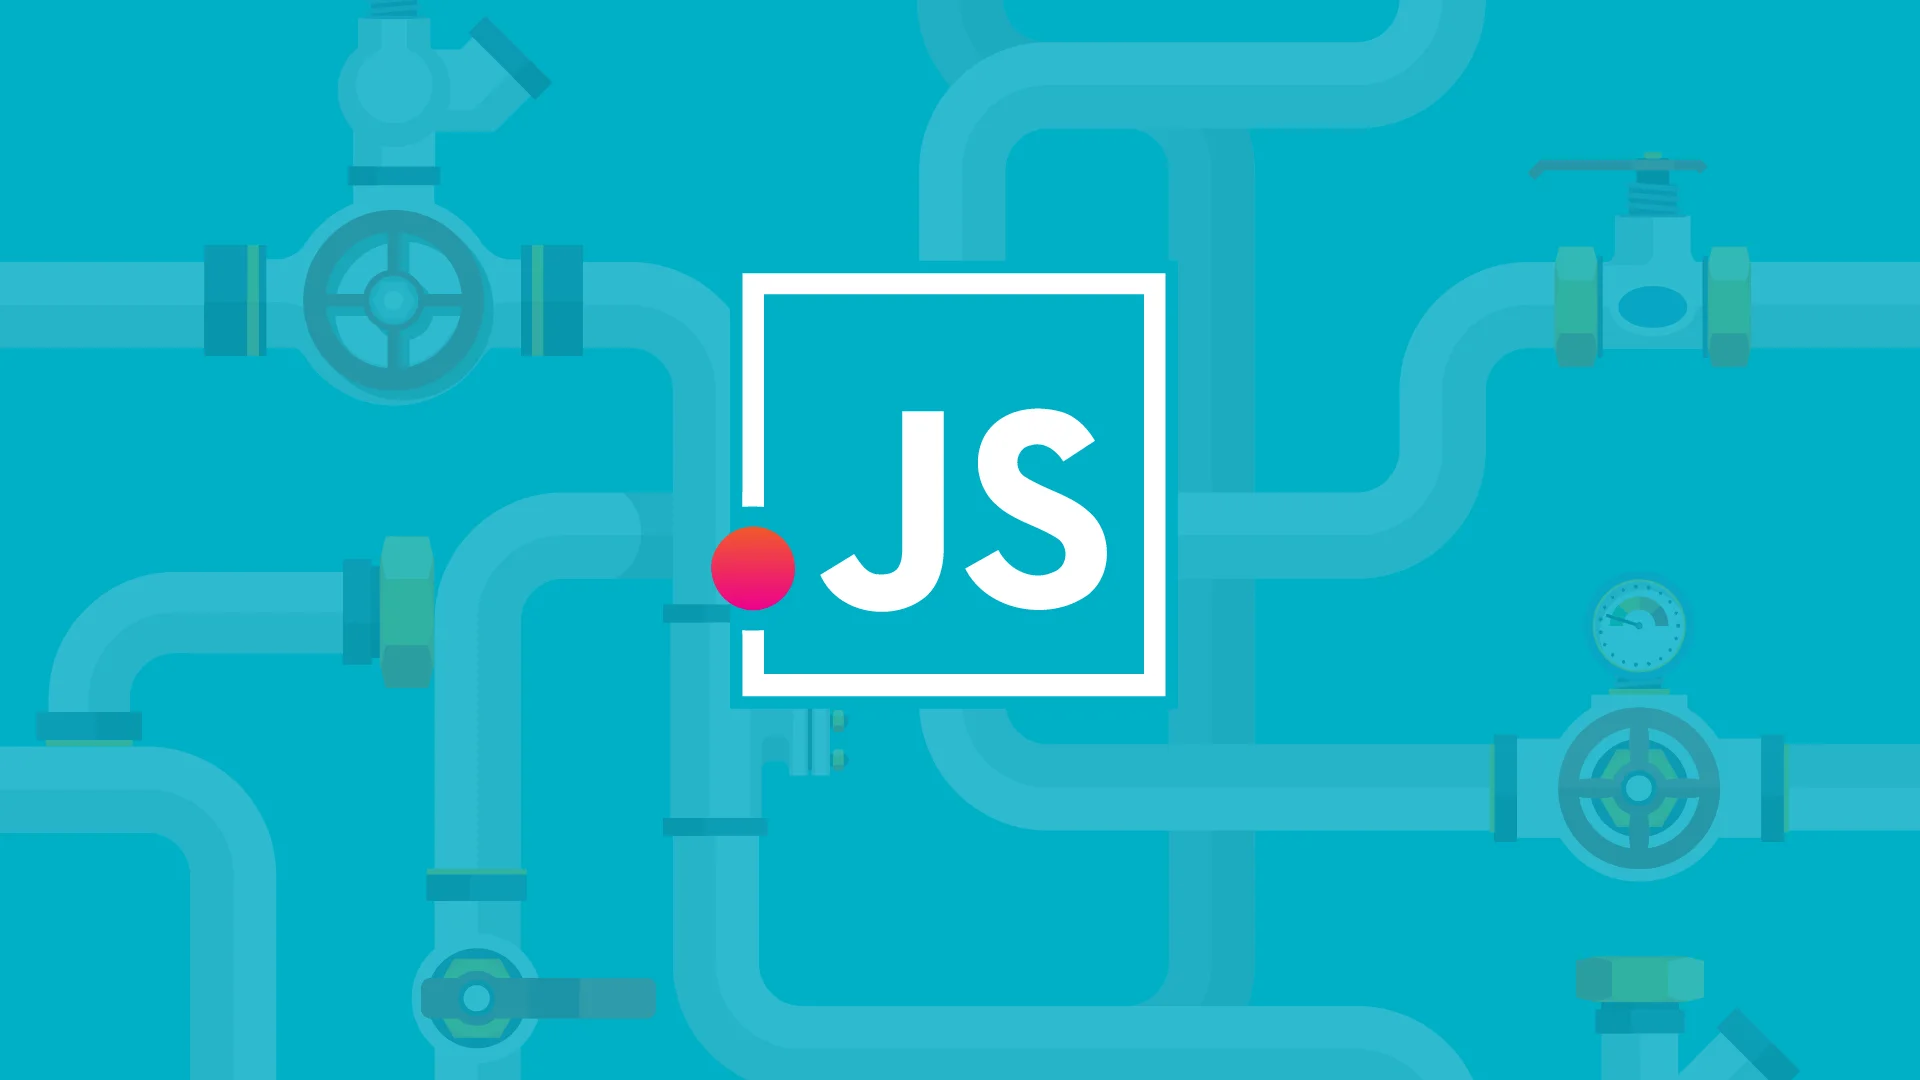 All You Need To Know About Pipeline Operator And Piping In JavaScript